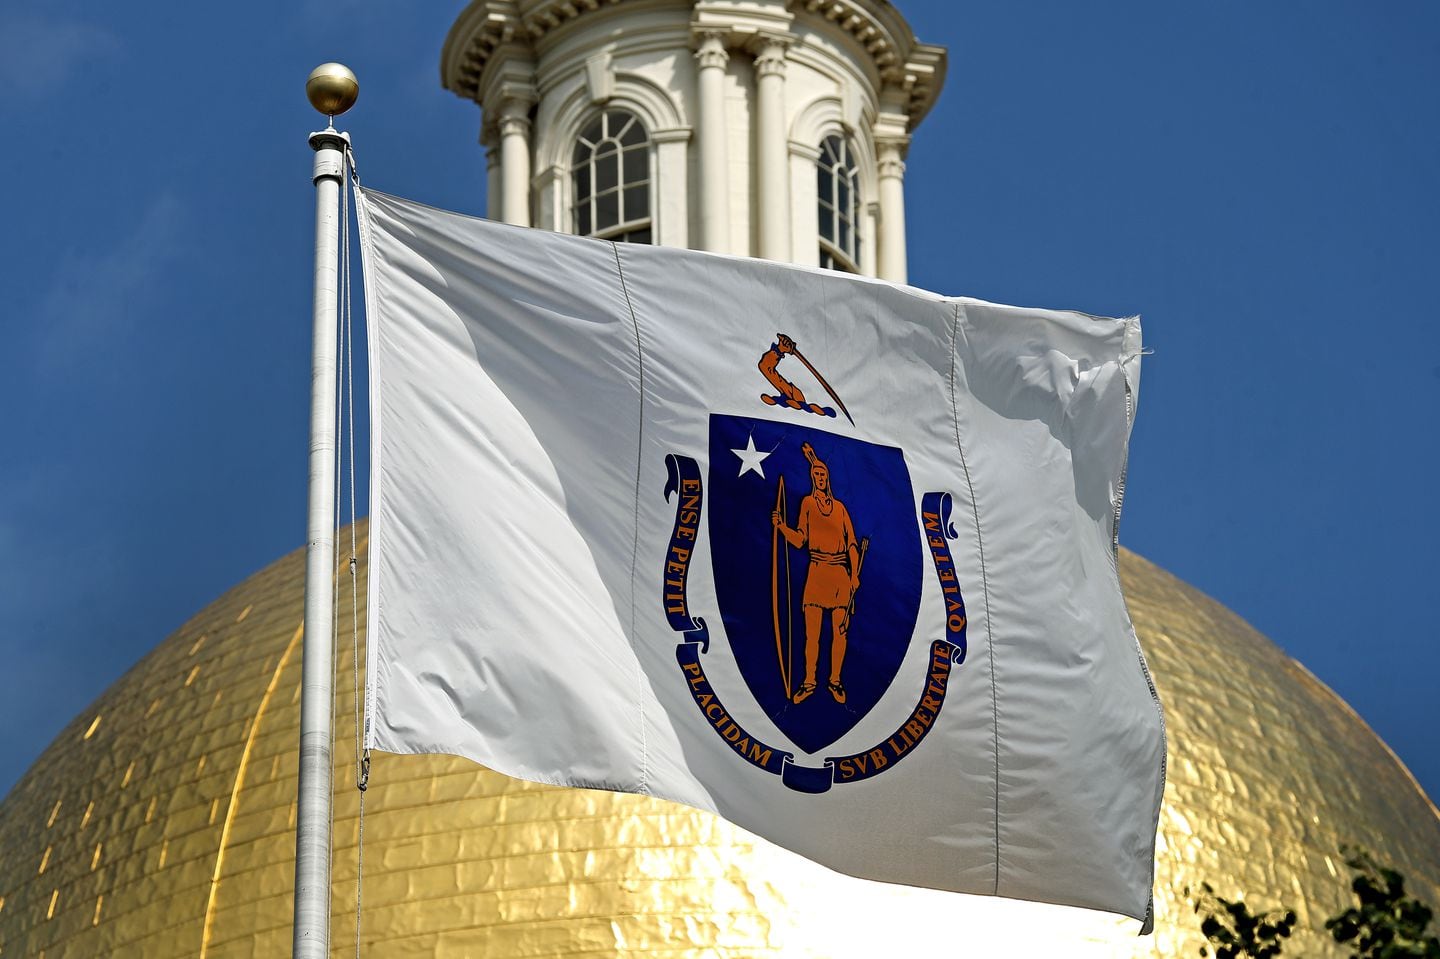 The Massachusetts state flag flies in front of the State House.